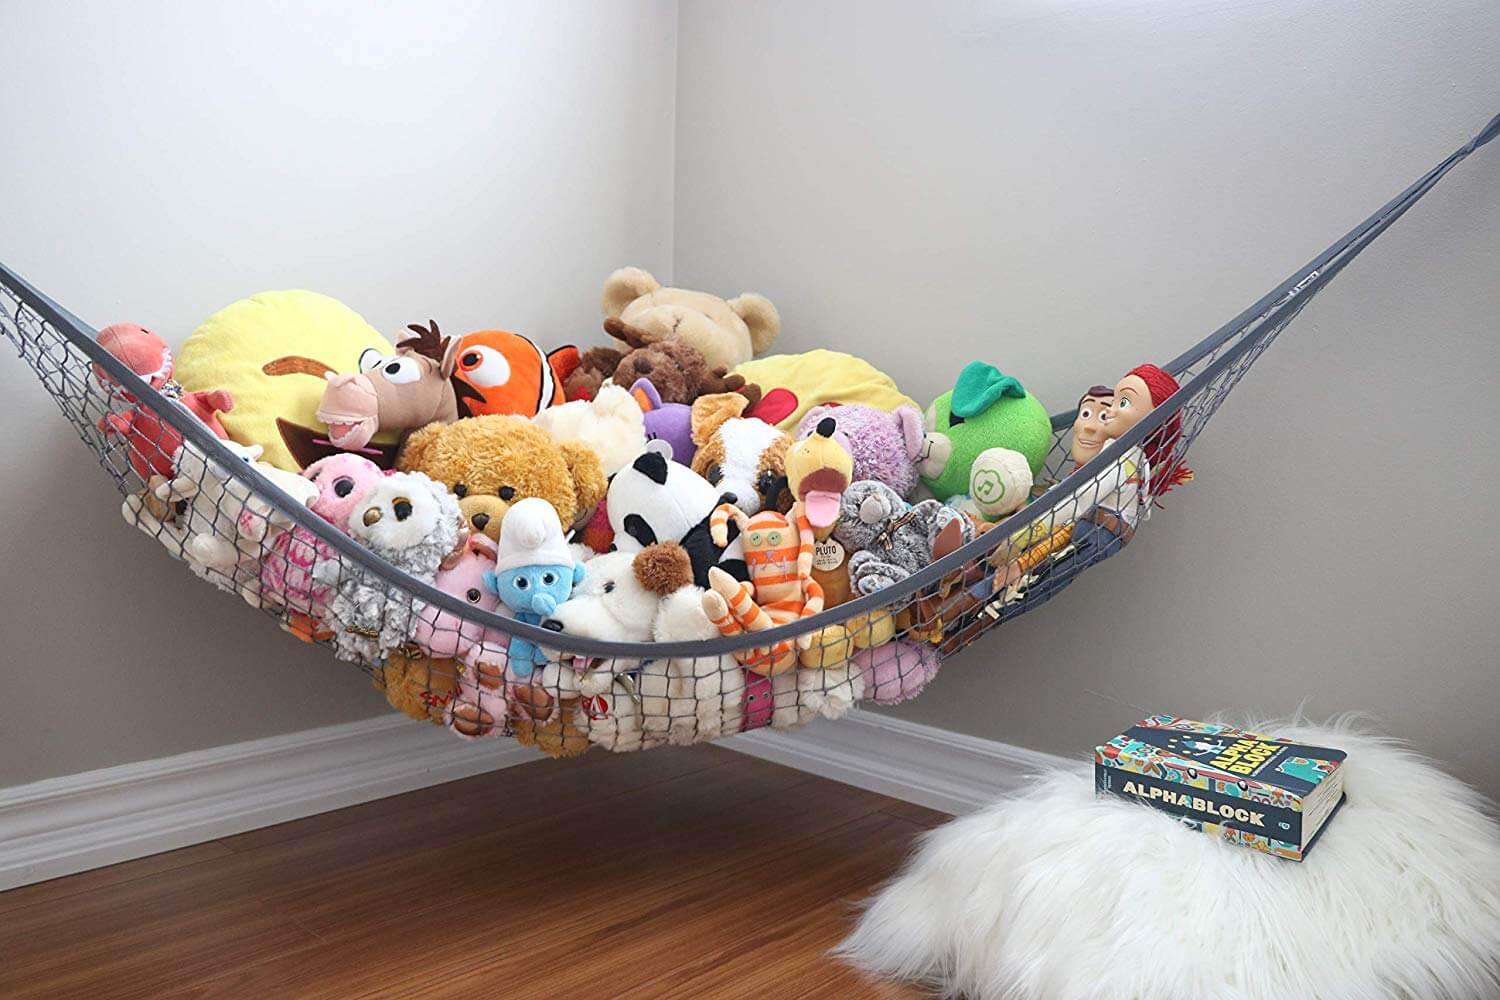 Large MiniOwls Toy Hammock Decorative Wall Corner Toy Storage for Kids Room Hanging Net for Stuffed Animal Storage or Playroom Organization Pink